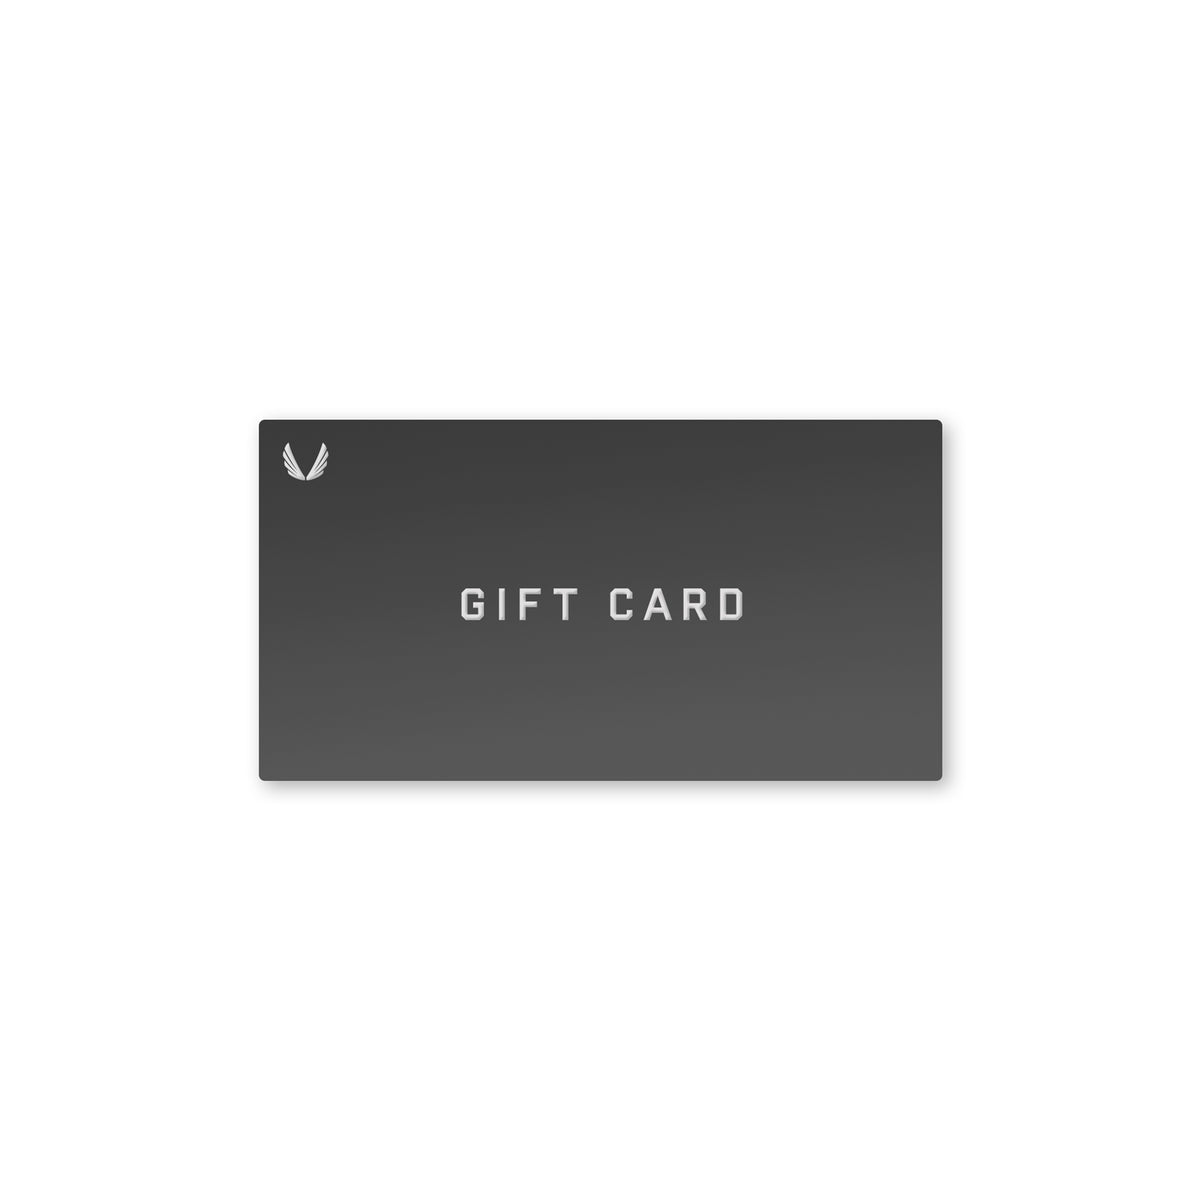 How To Buy Rec Room Gift Cards - Simple Guide 